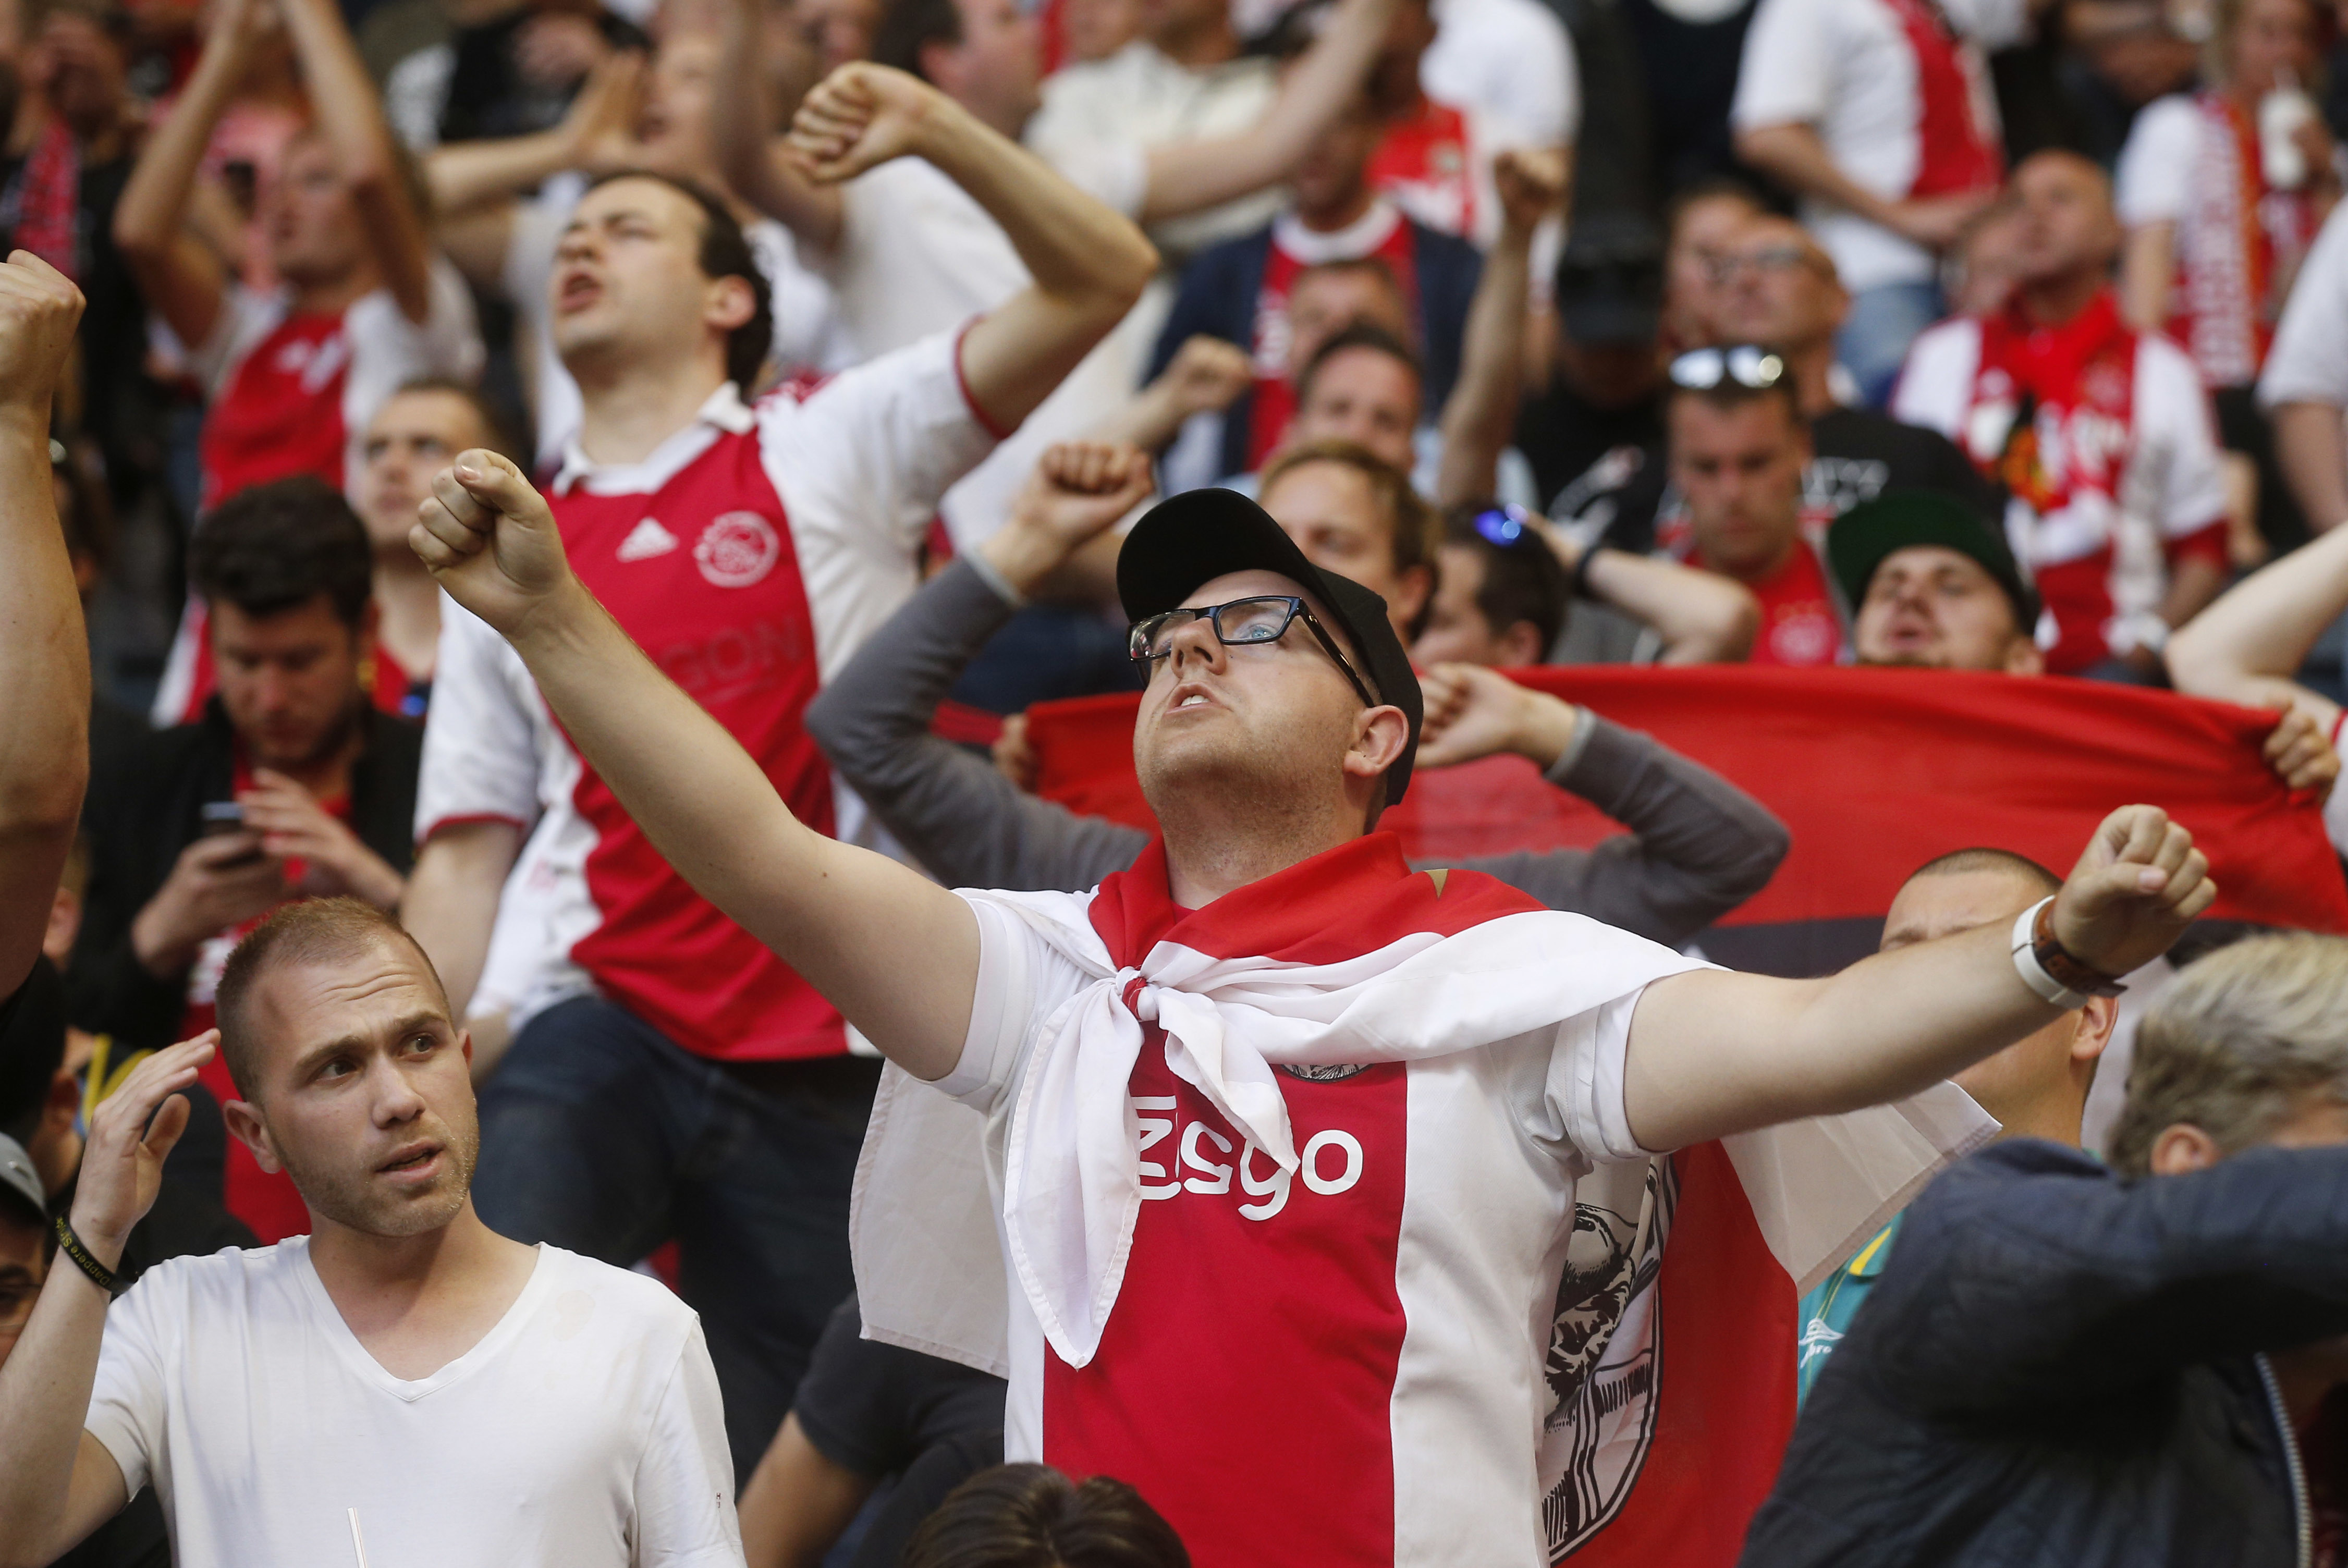 Ajax fans in the stands before the Europa League Final against Manchester United, 24 May, 2017 (Reuters/Ints Kalnins Livepic)